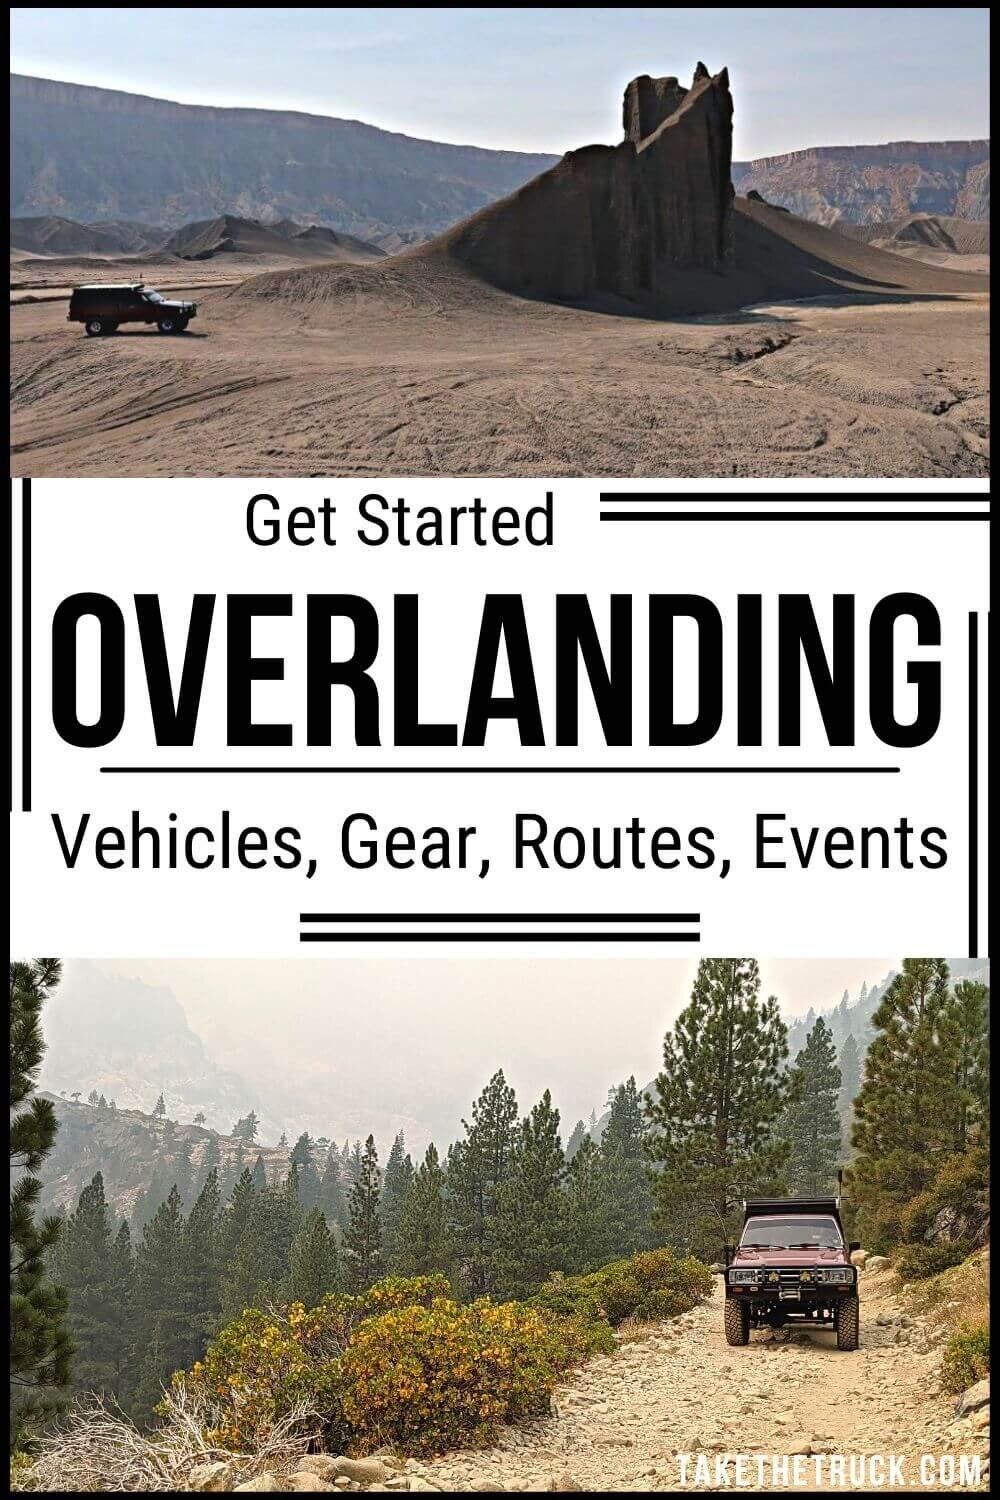 Overlanding &amp; overland travel resource: overlanding for beginners, budget overlanding, overlanding recovery &amp; gear, overland vehicles, overlanding tips, overlanding destinations &amp; routes